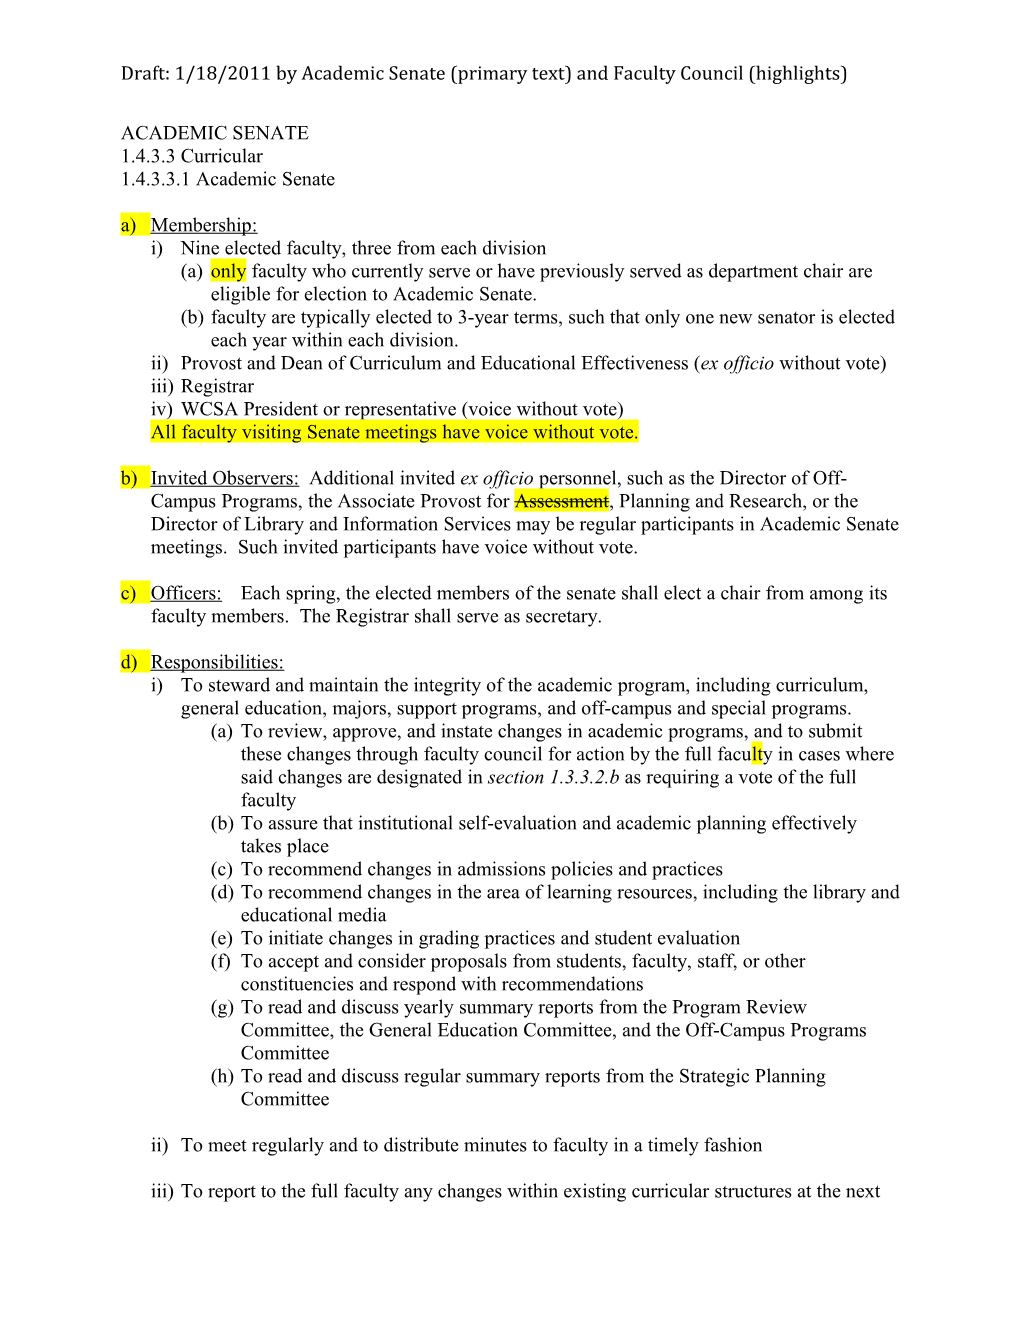 Draft: 1/18/2011 by Academic Senate (Primary Text) and Faculty Council (Highlights)